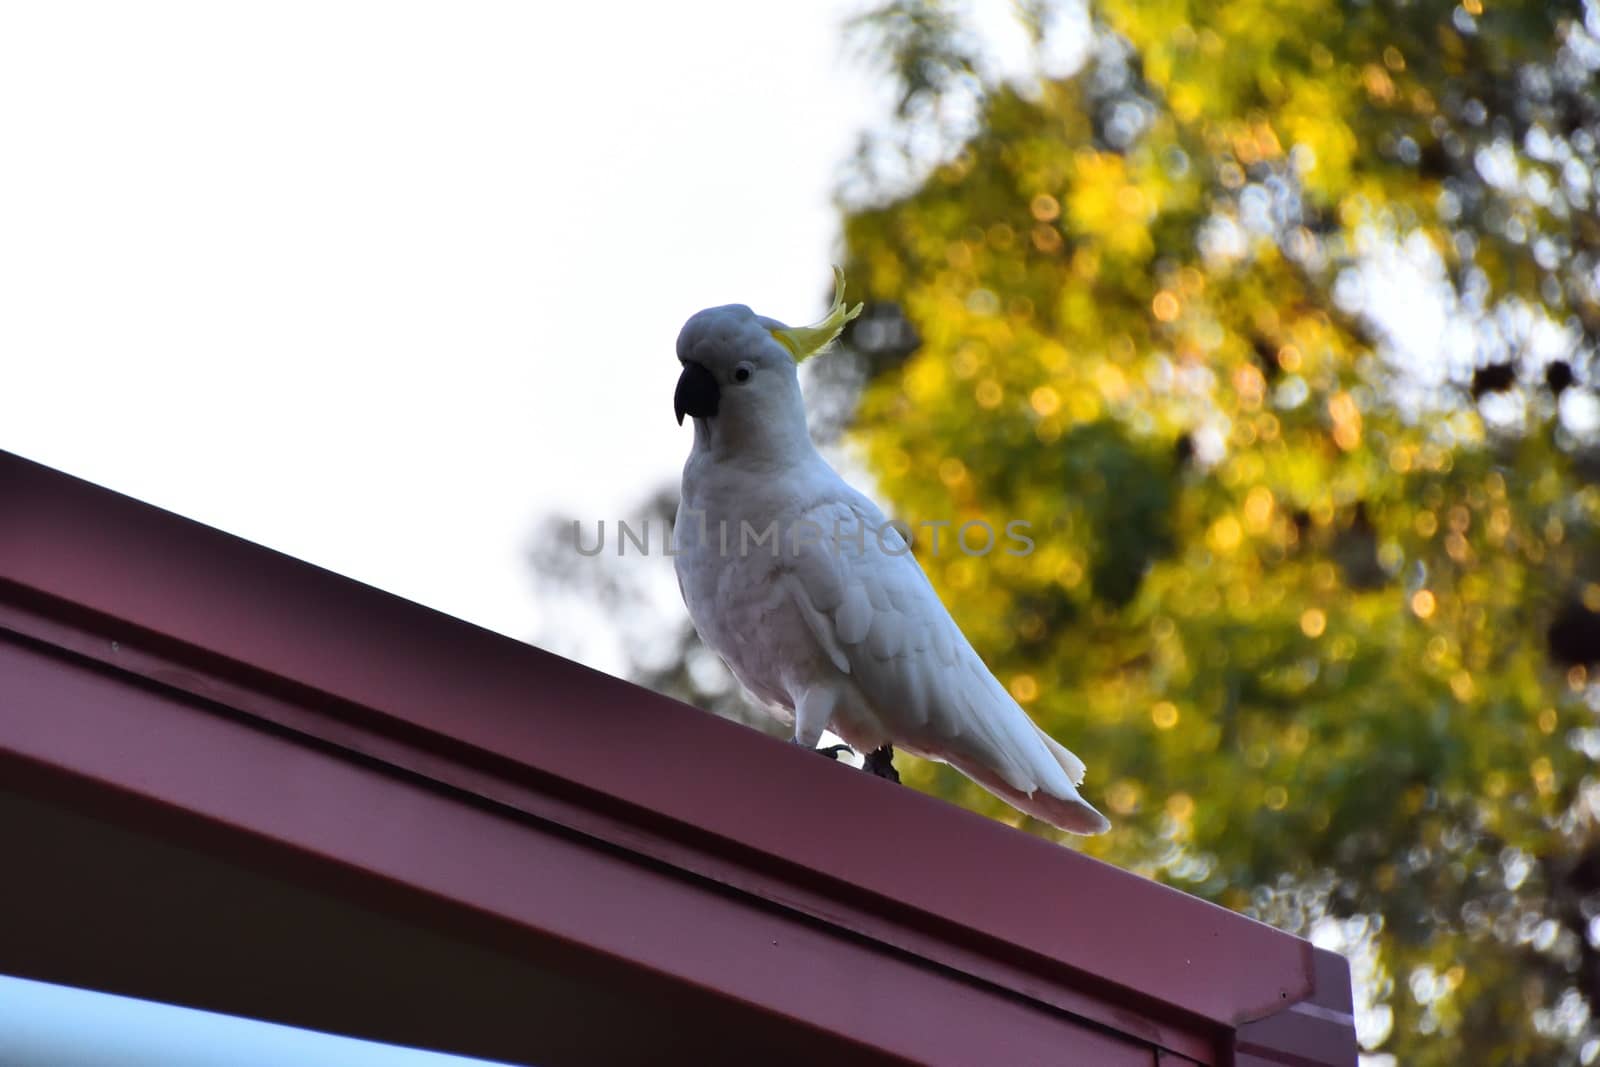 A wild cockatoo on a red roof